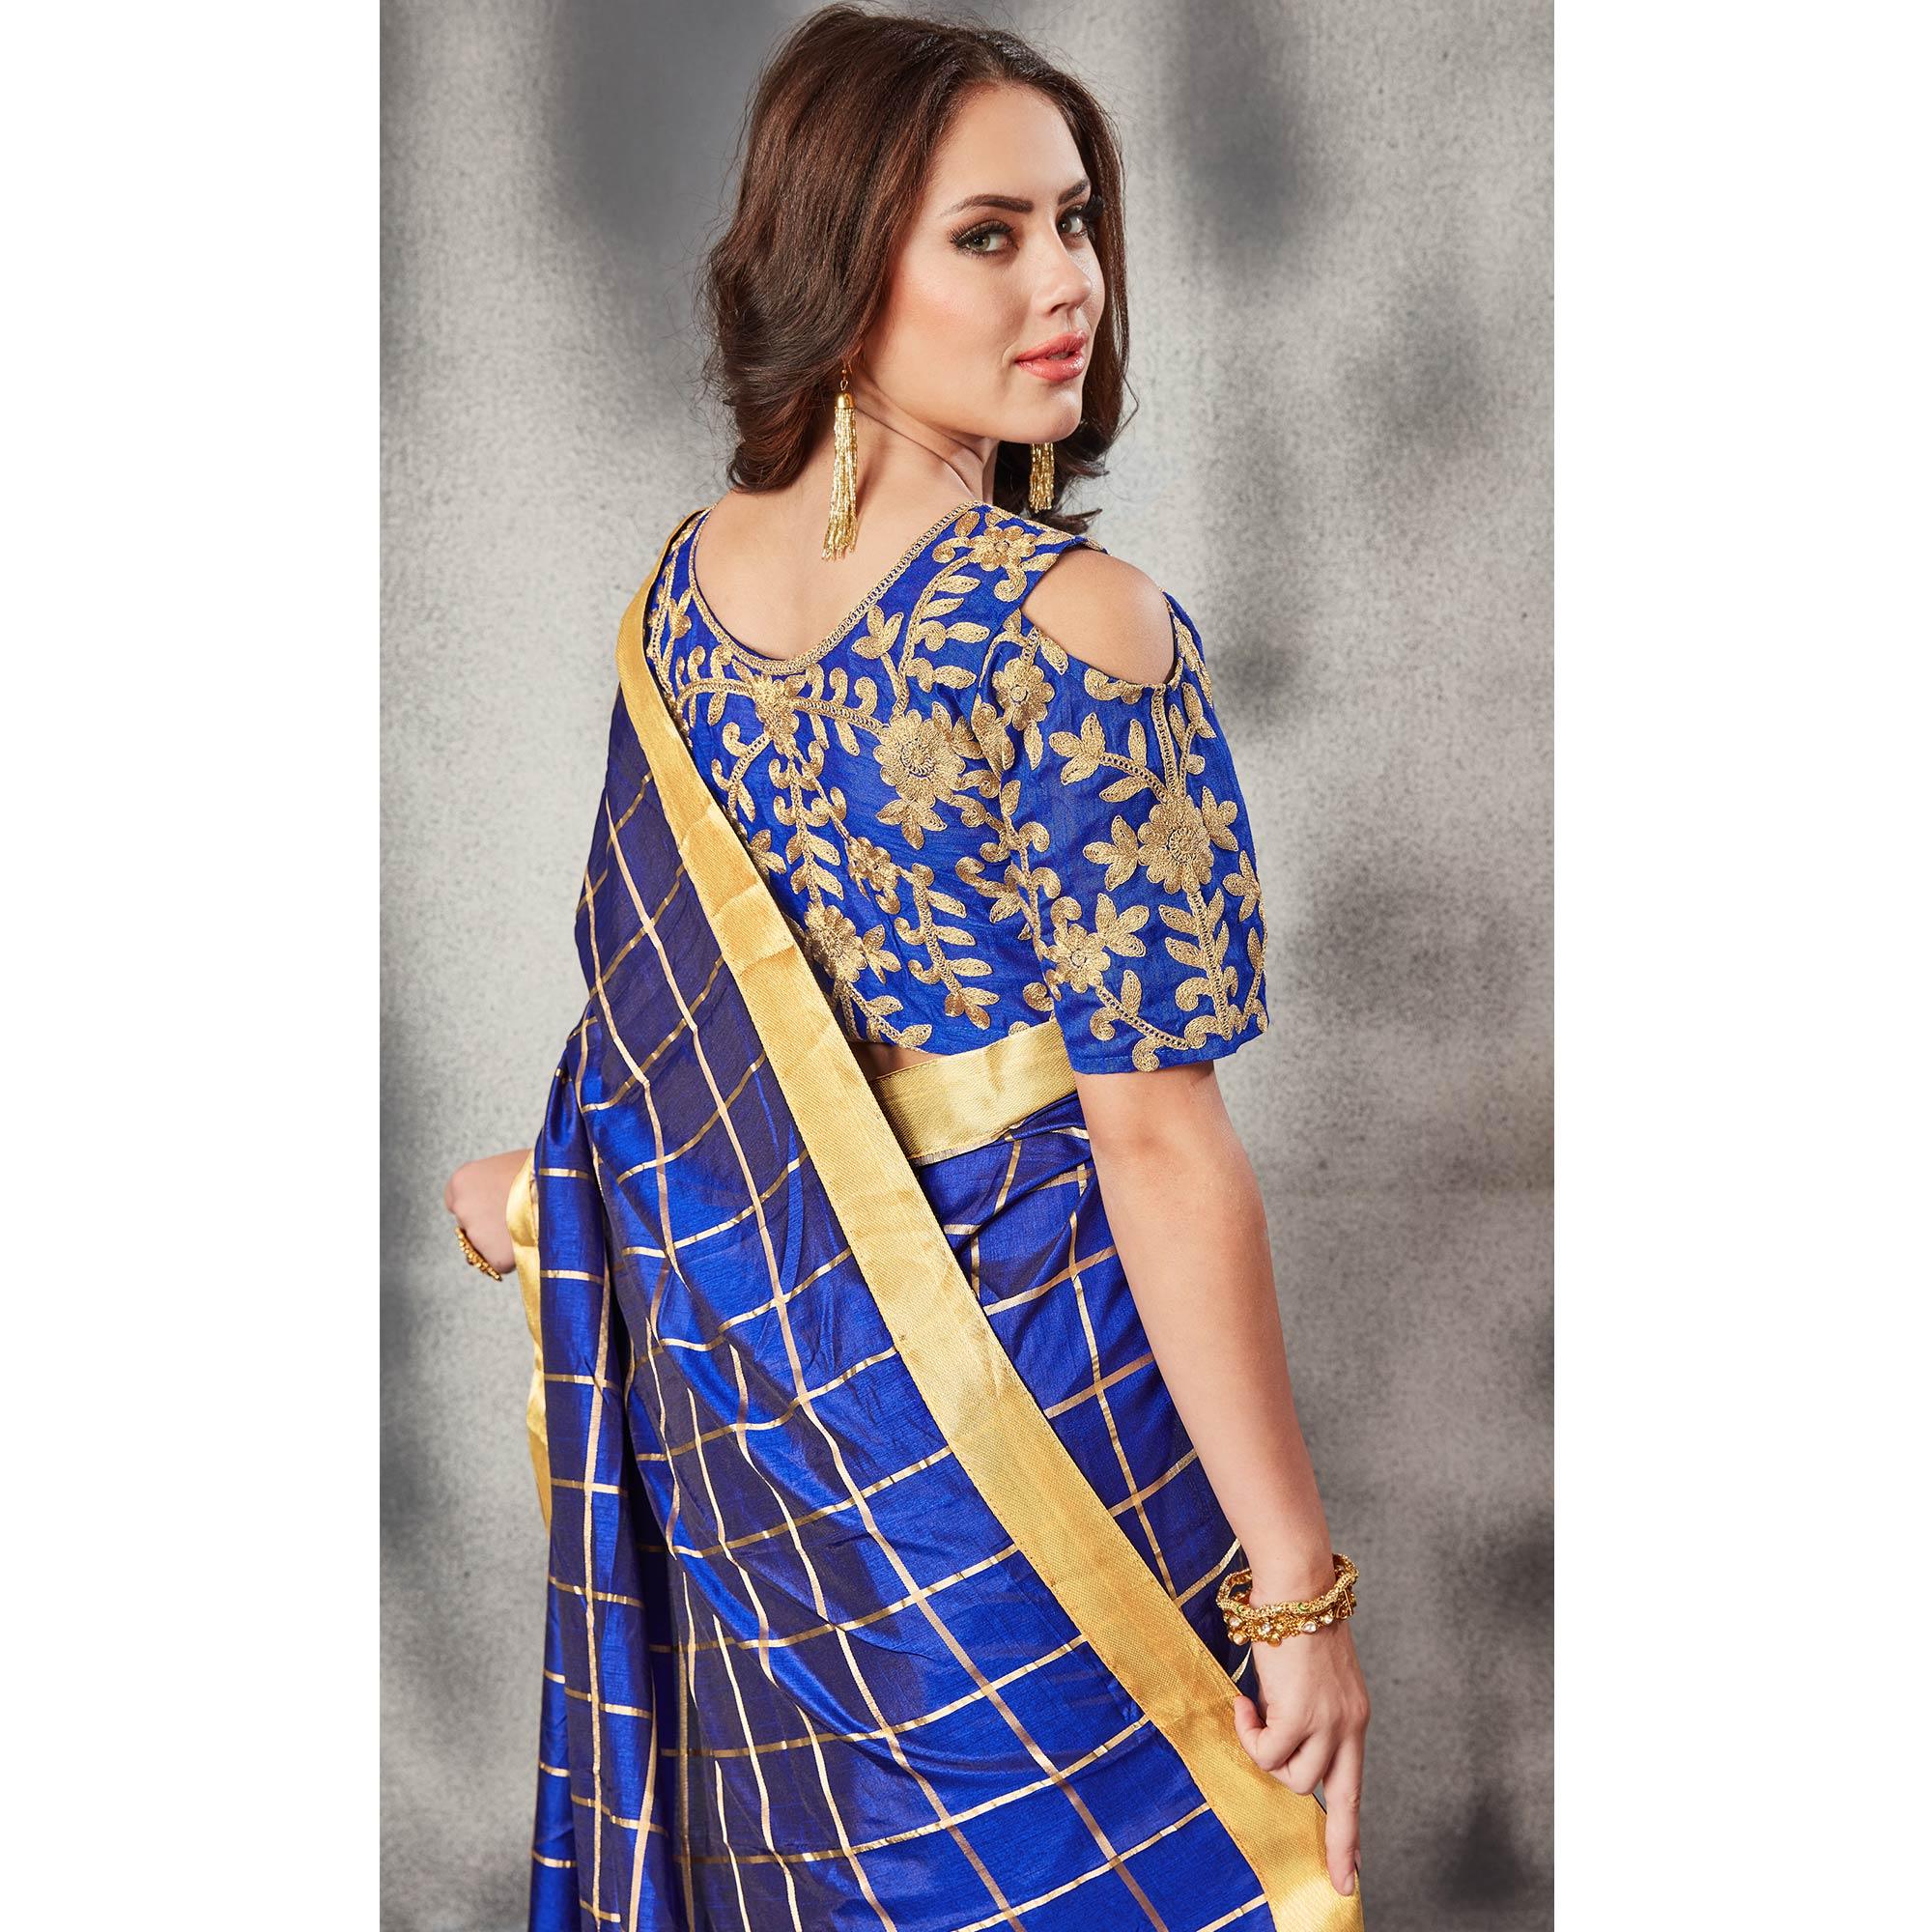 Sophisticated Royal Blue Colored Partywear Printed Silk Saree - Peachmode